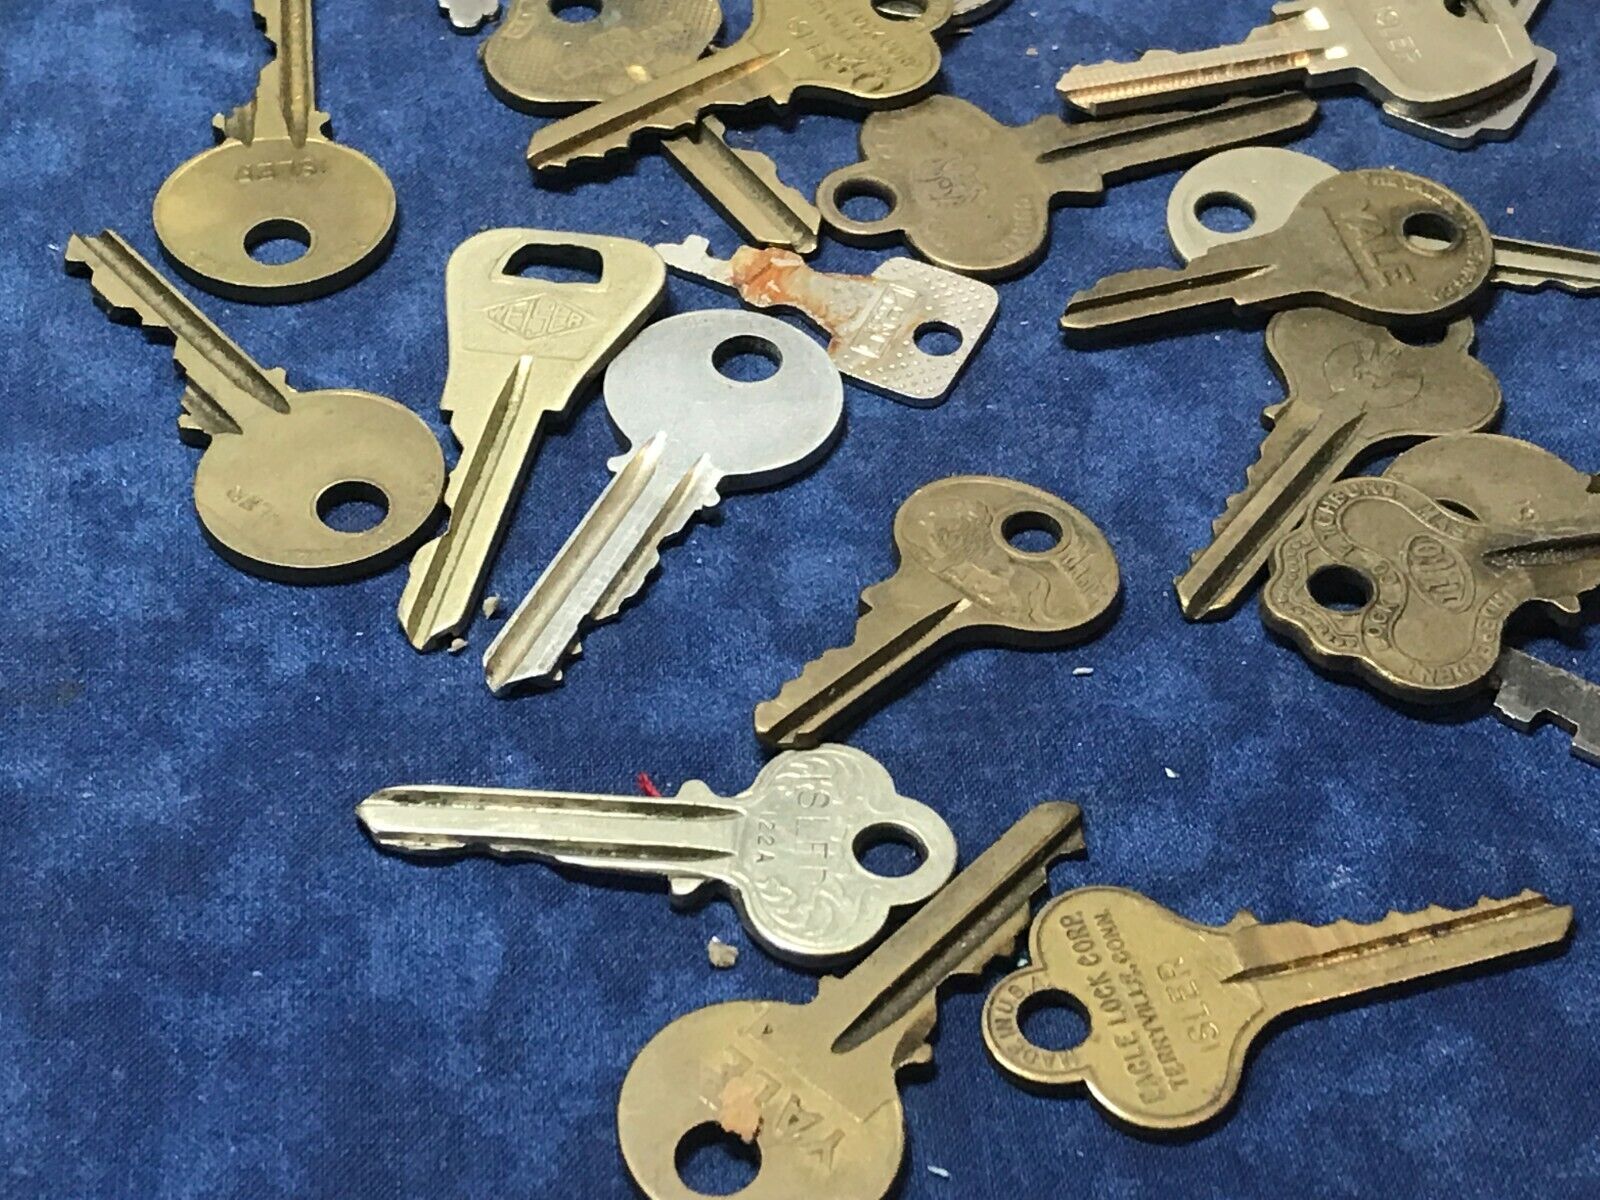 LOT OF 38 KEYS DIFFERENT BRANDS, SHAPES, ETC WITH STORAGE TIN